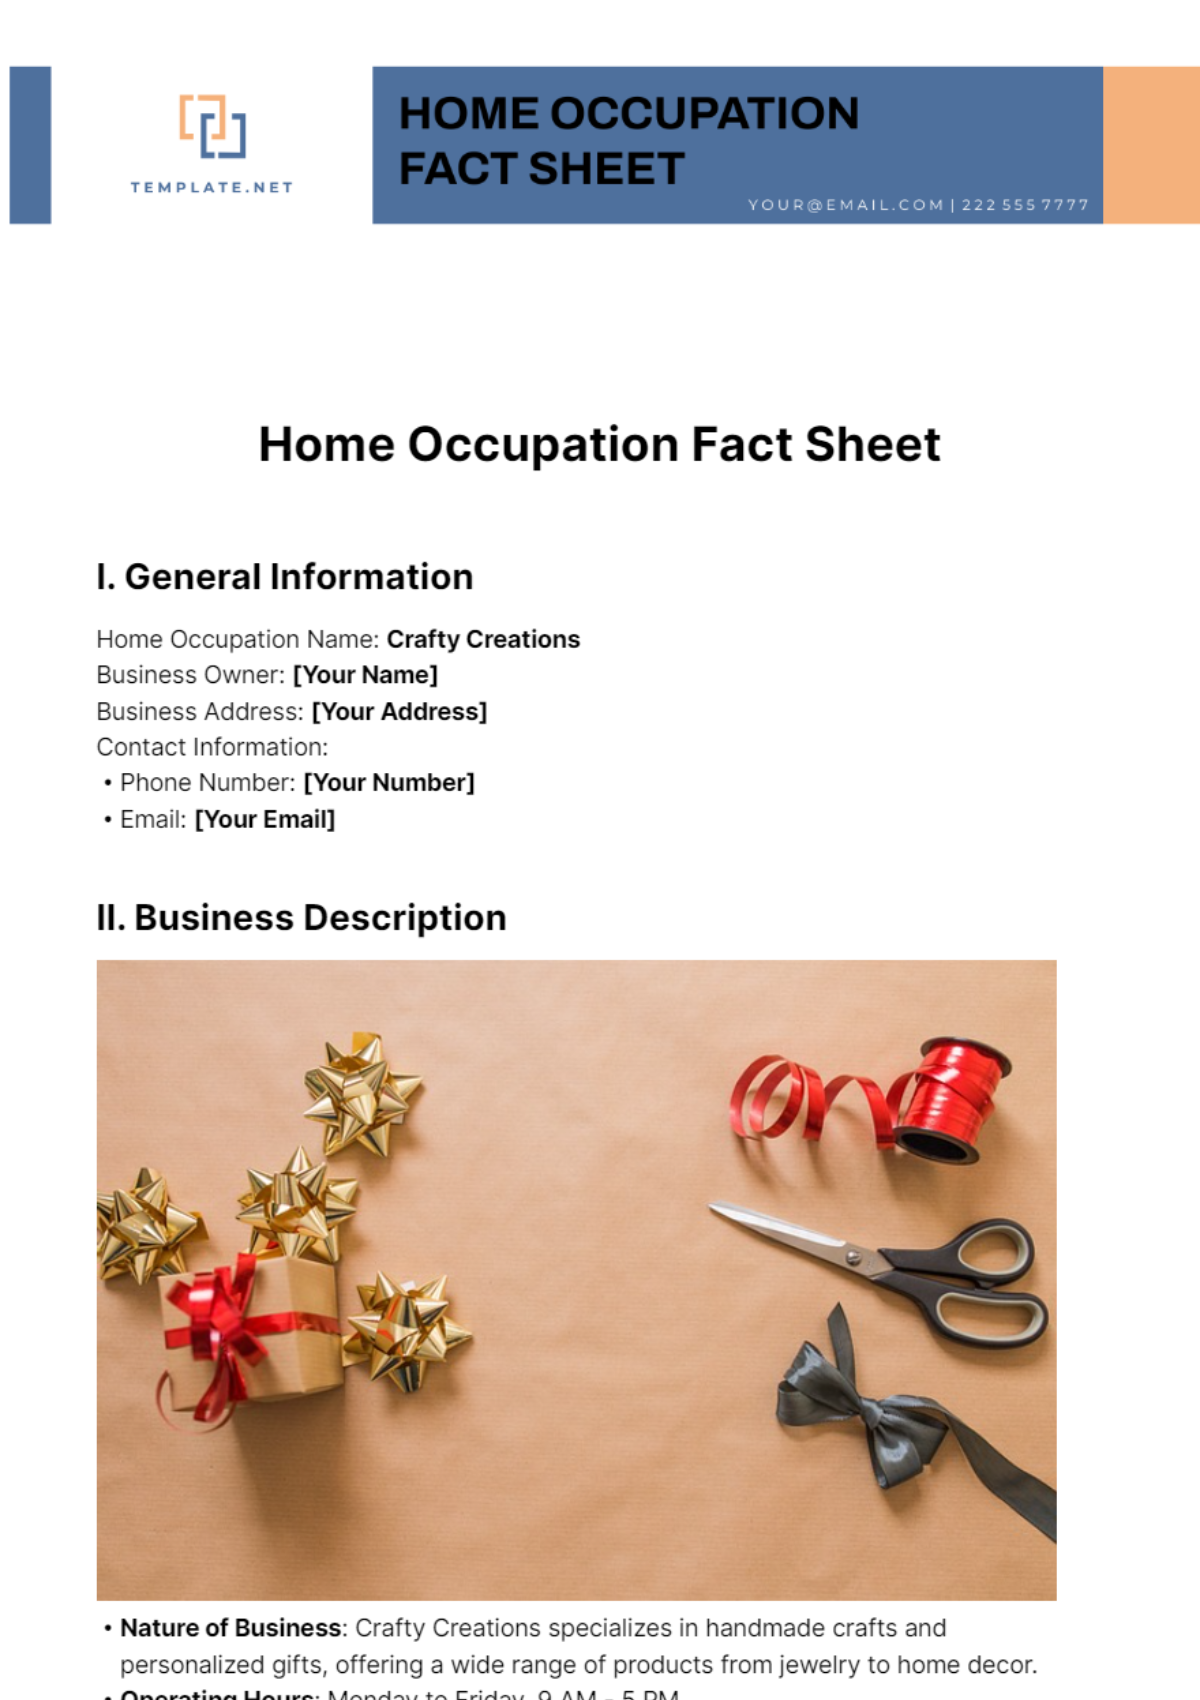 Home Occupation Fact Sheet Template